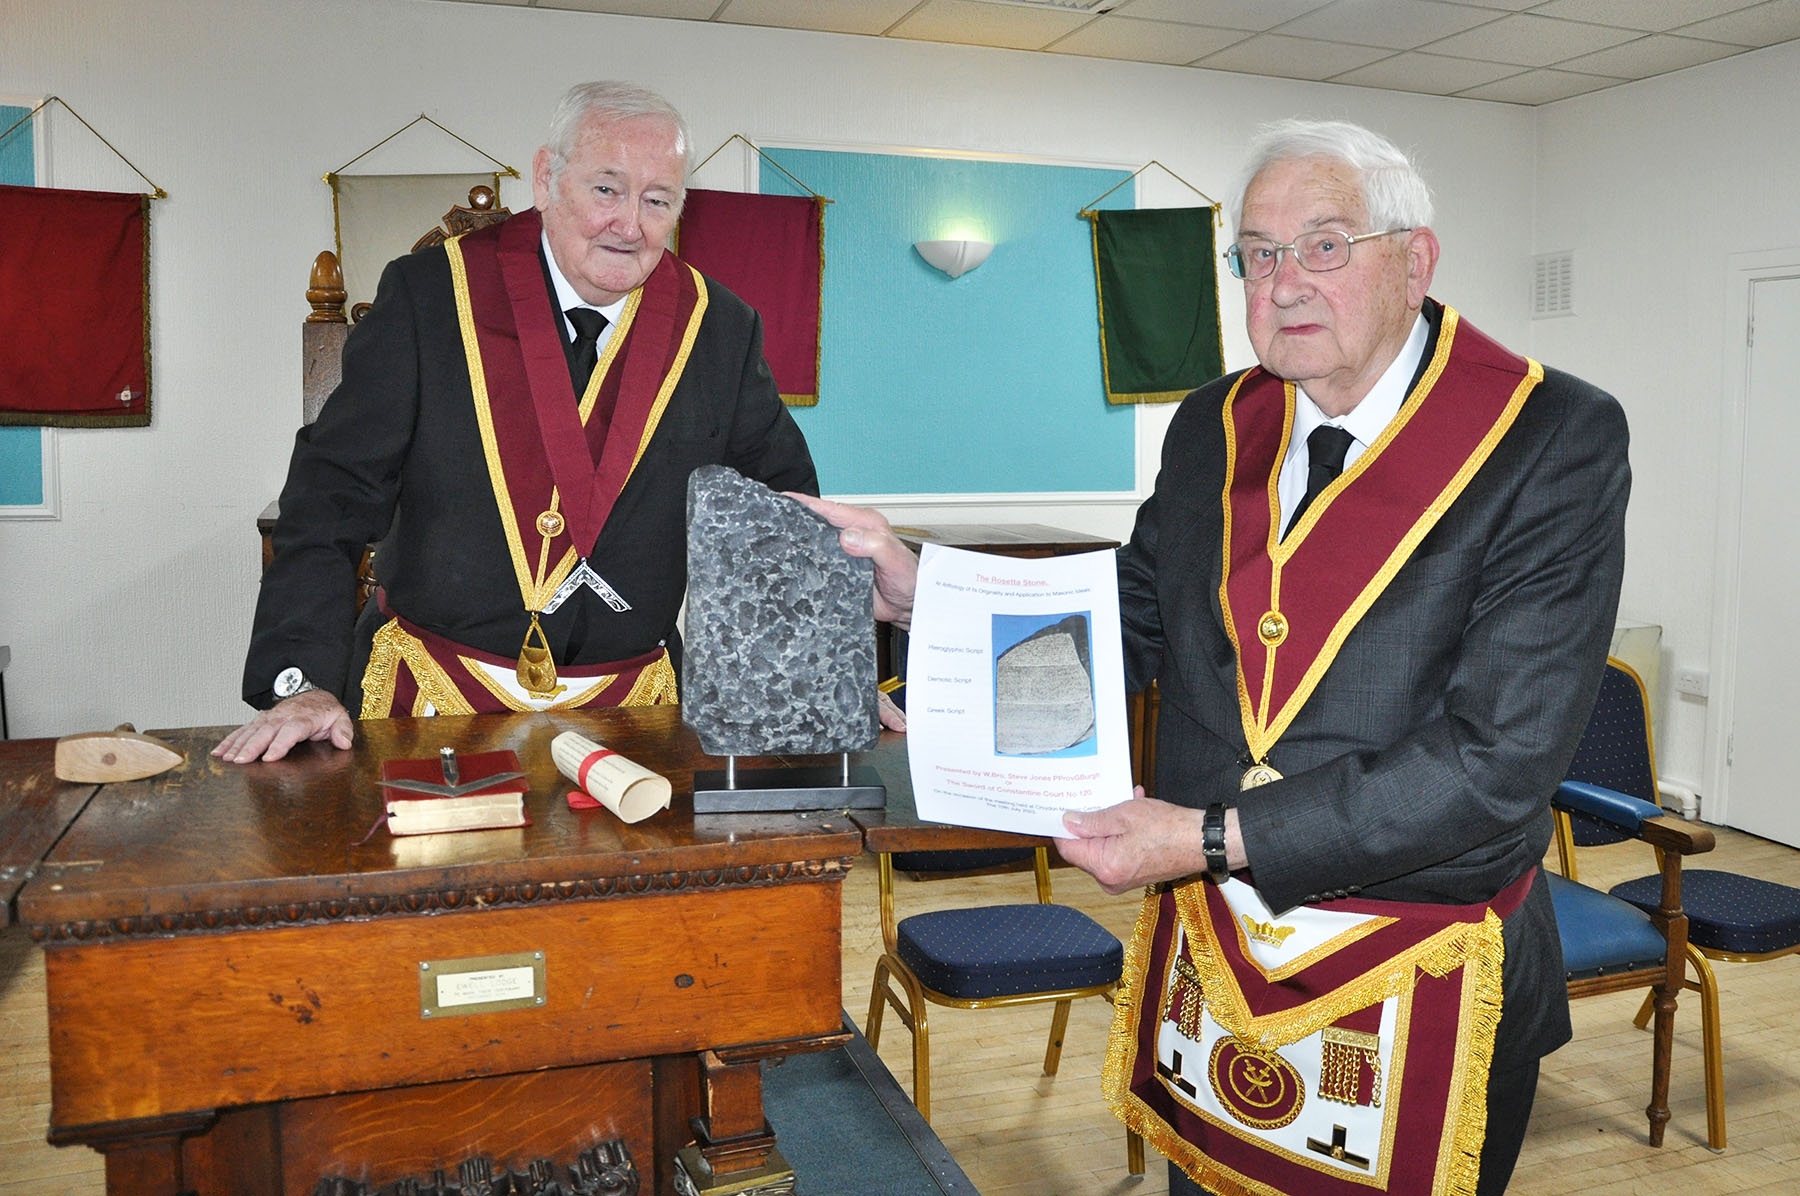 A further advancement in Masonic knowledge at the Sword of Constantine Court